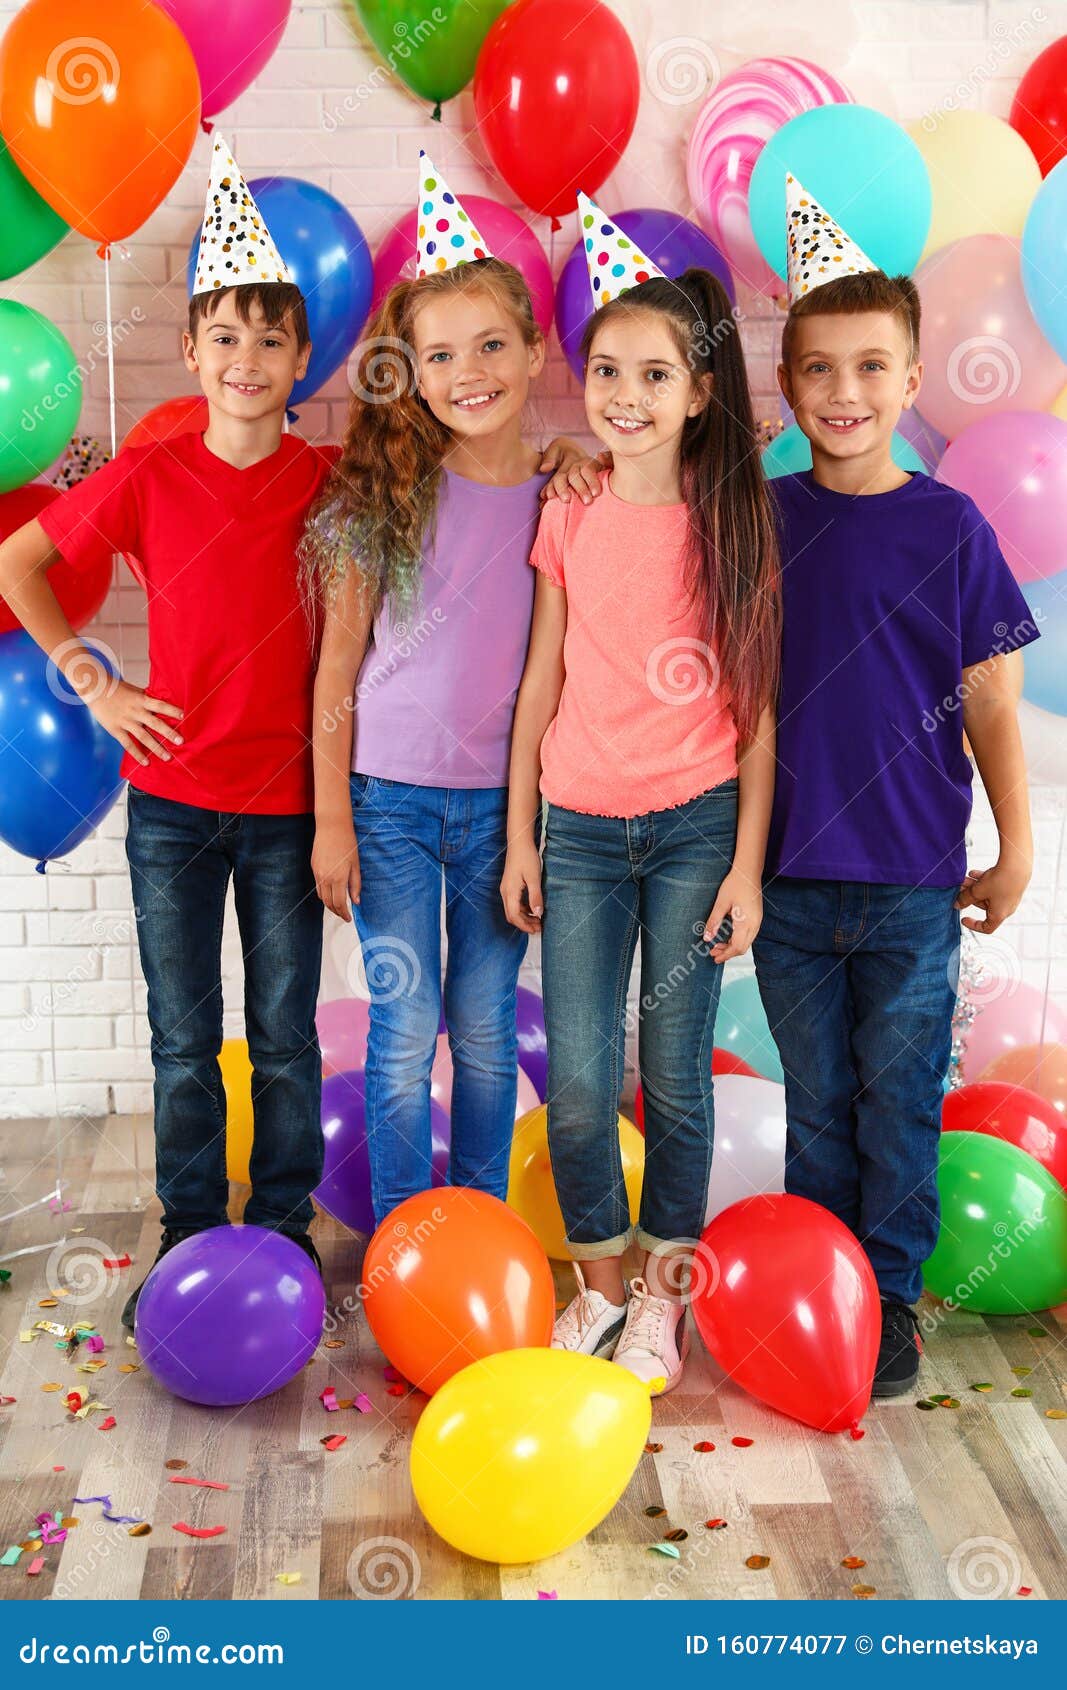 Happy Children Near Balloons At Birthday Party Stock Image - Image of friends, cheerful: 160774077